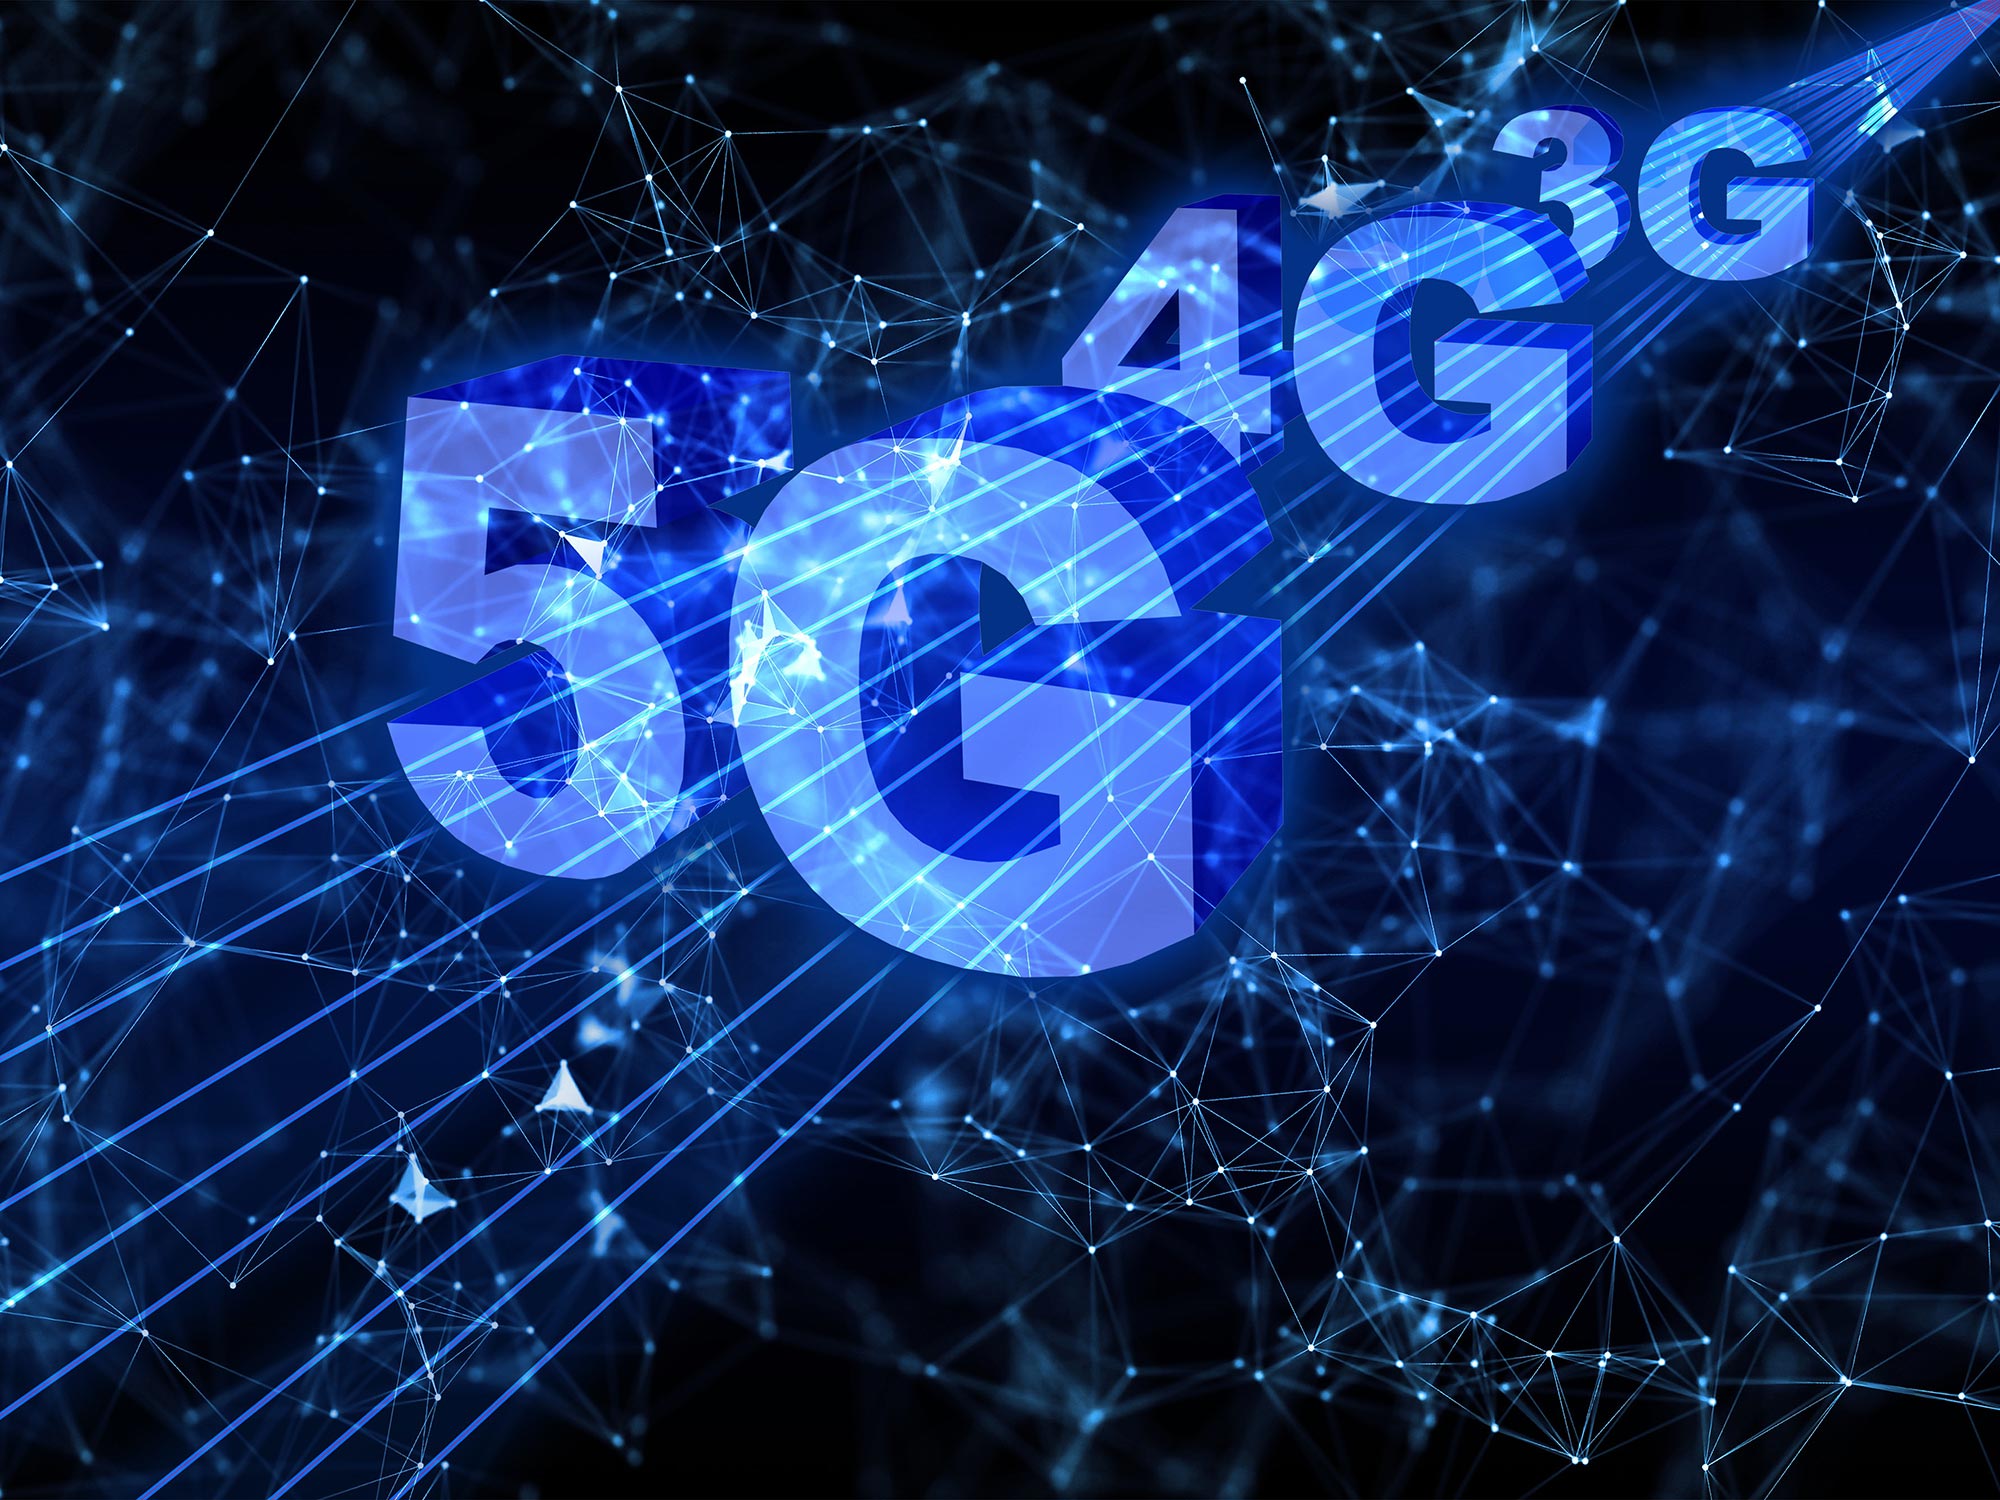 Stop global implementation of 5G networks until security is confirmed